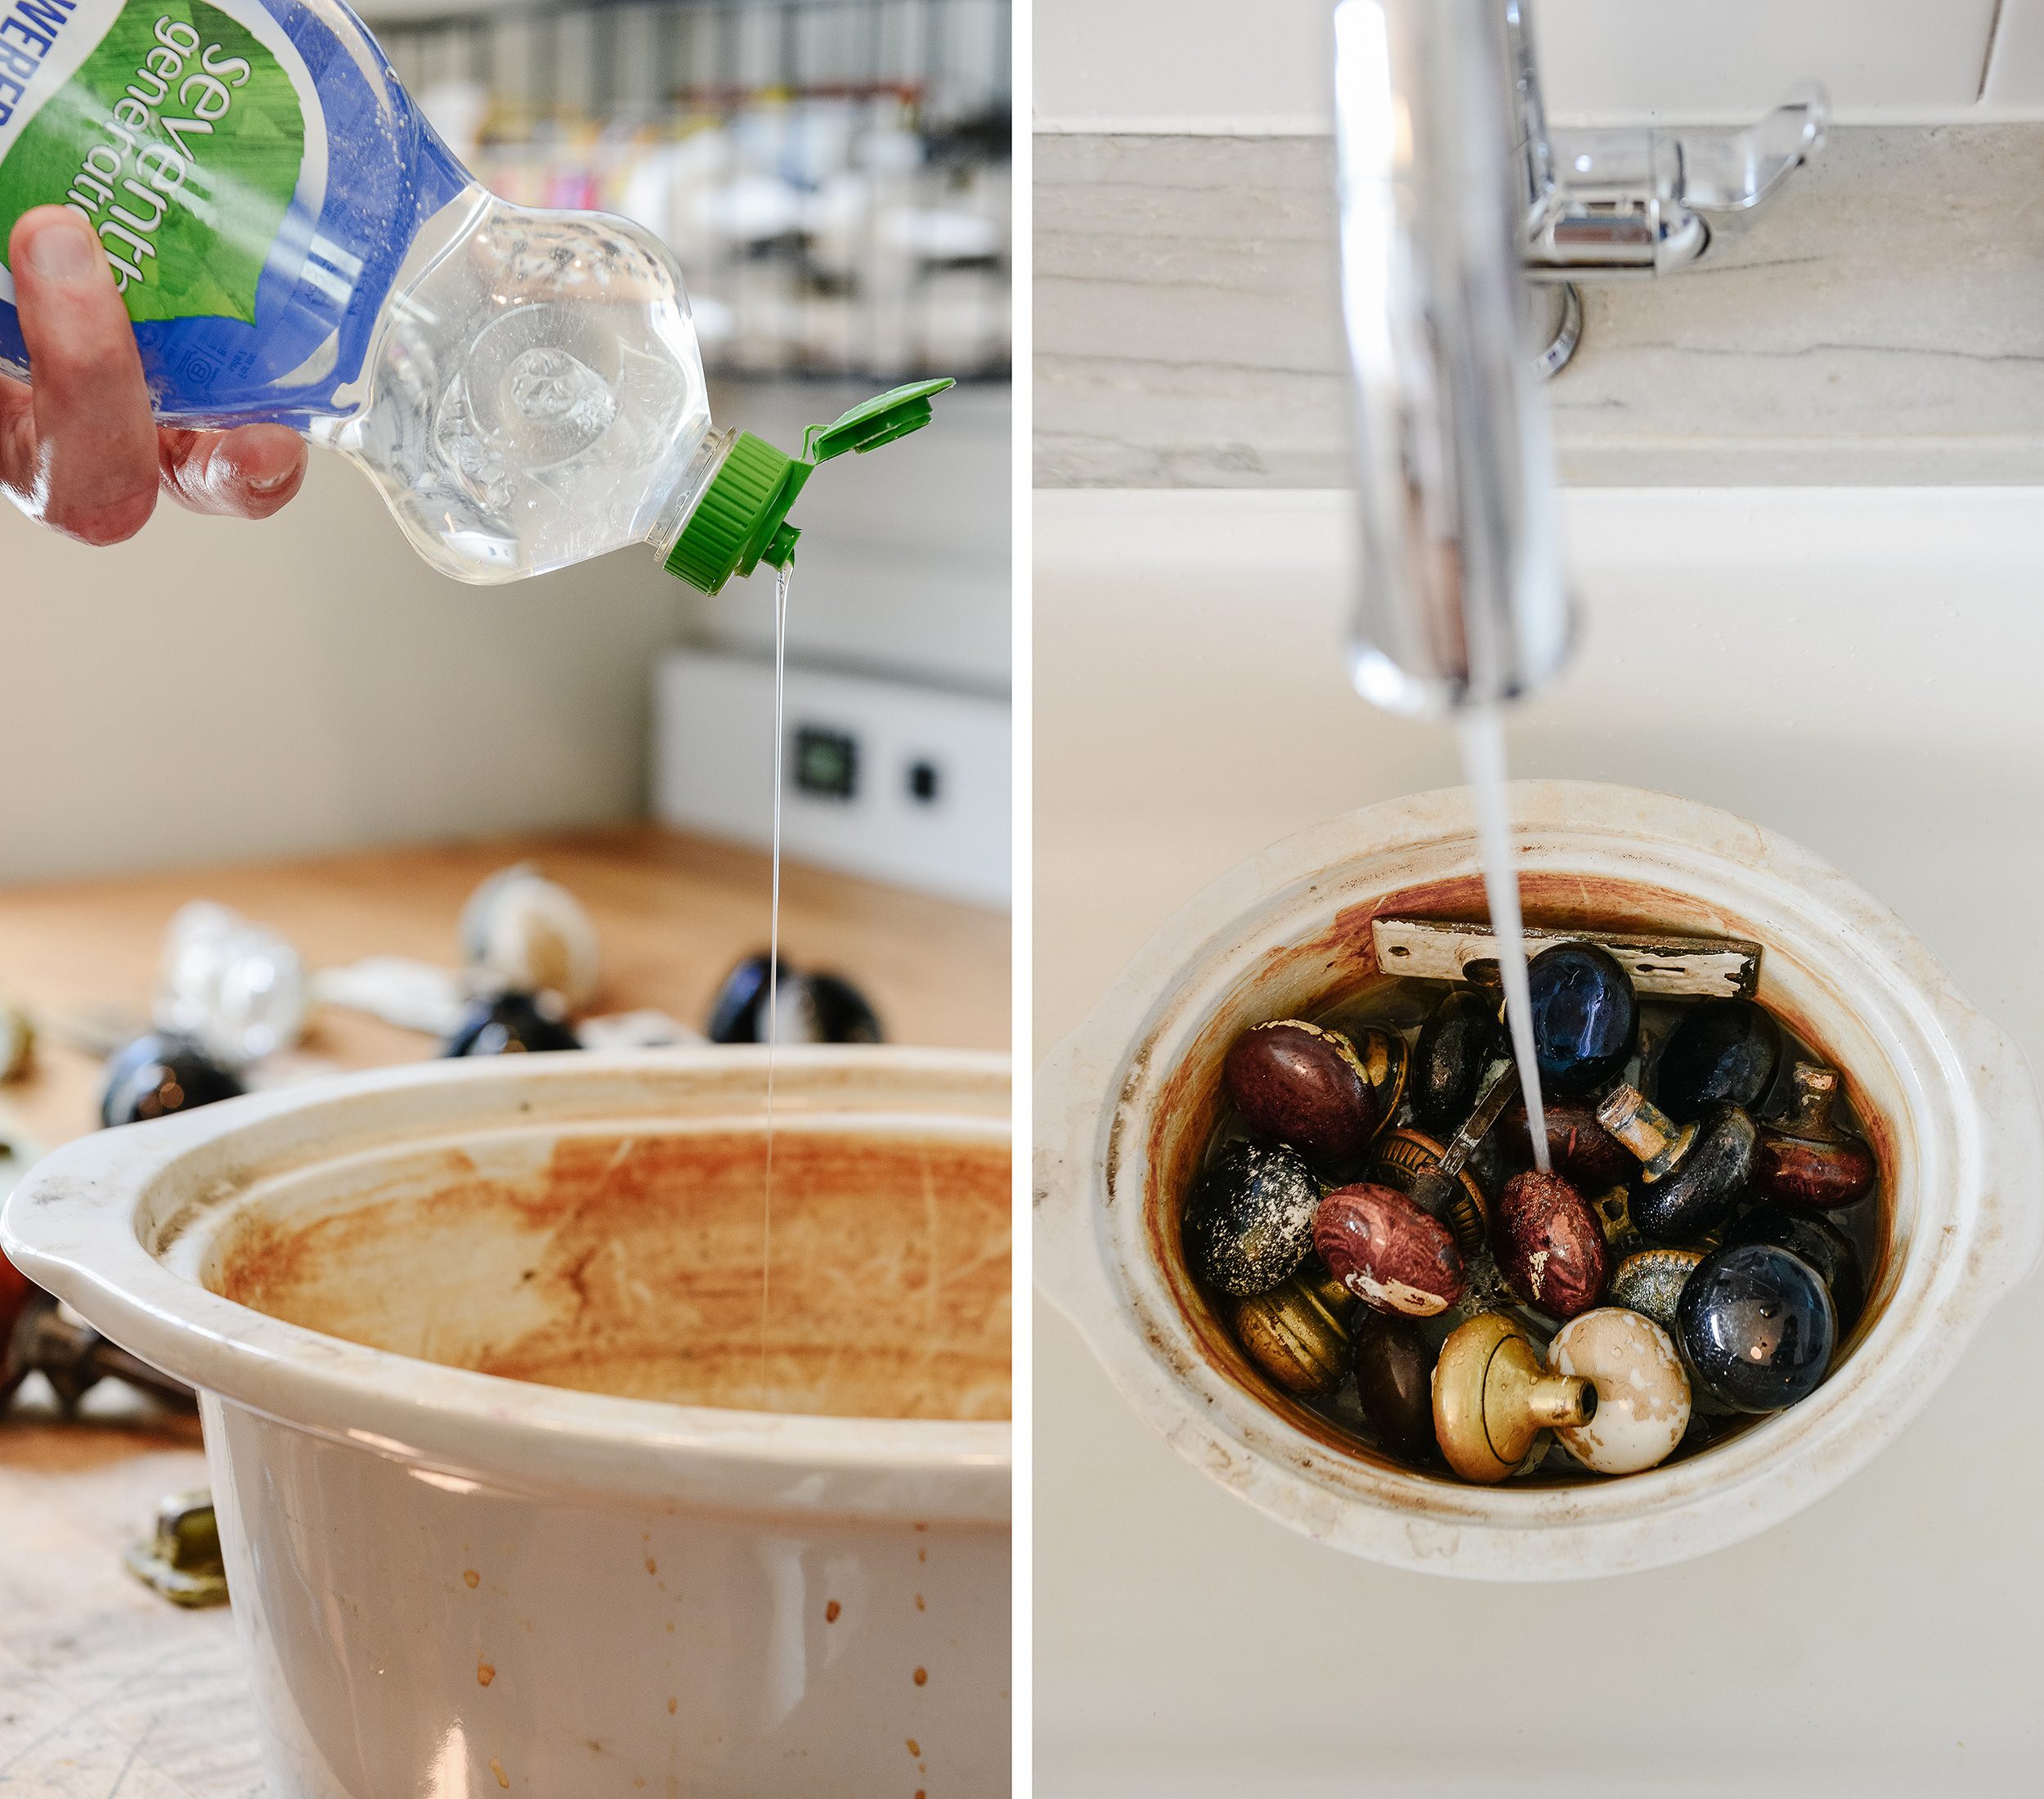 A side-by-side of filling a crockpot with dish soap and old hardware. I'll be using the slow cooker method to boil the paint off! via Yellow Brick Home